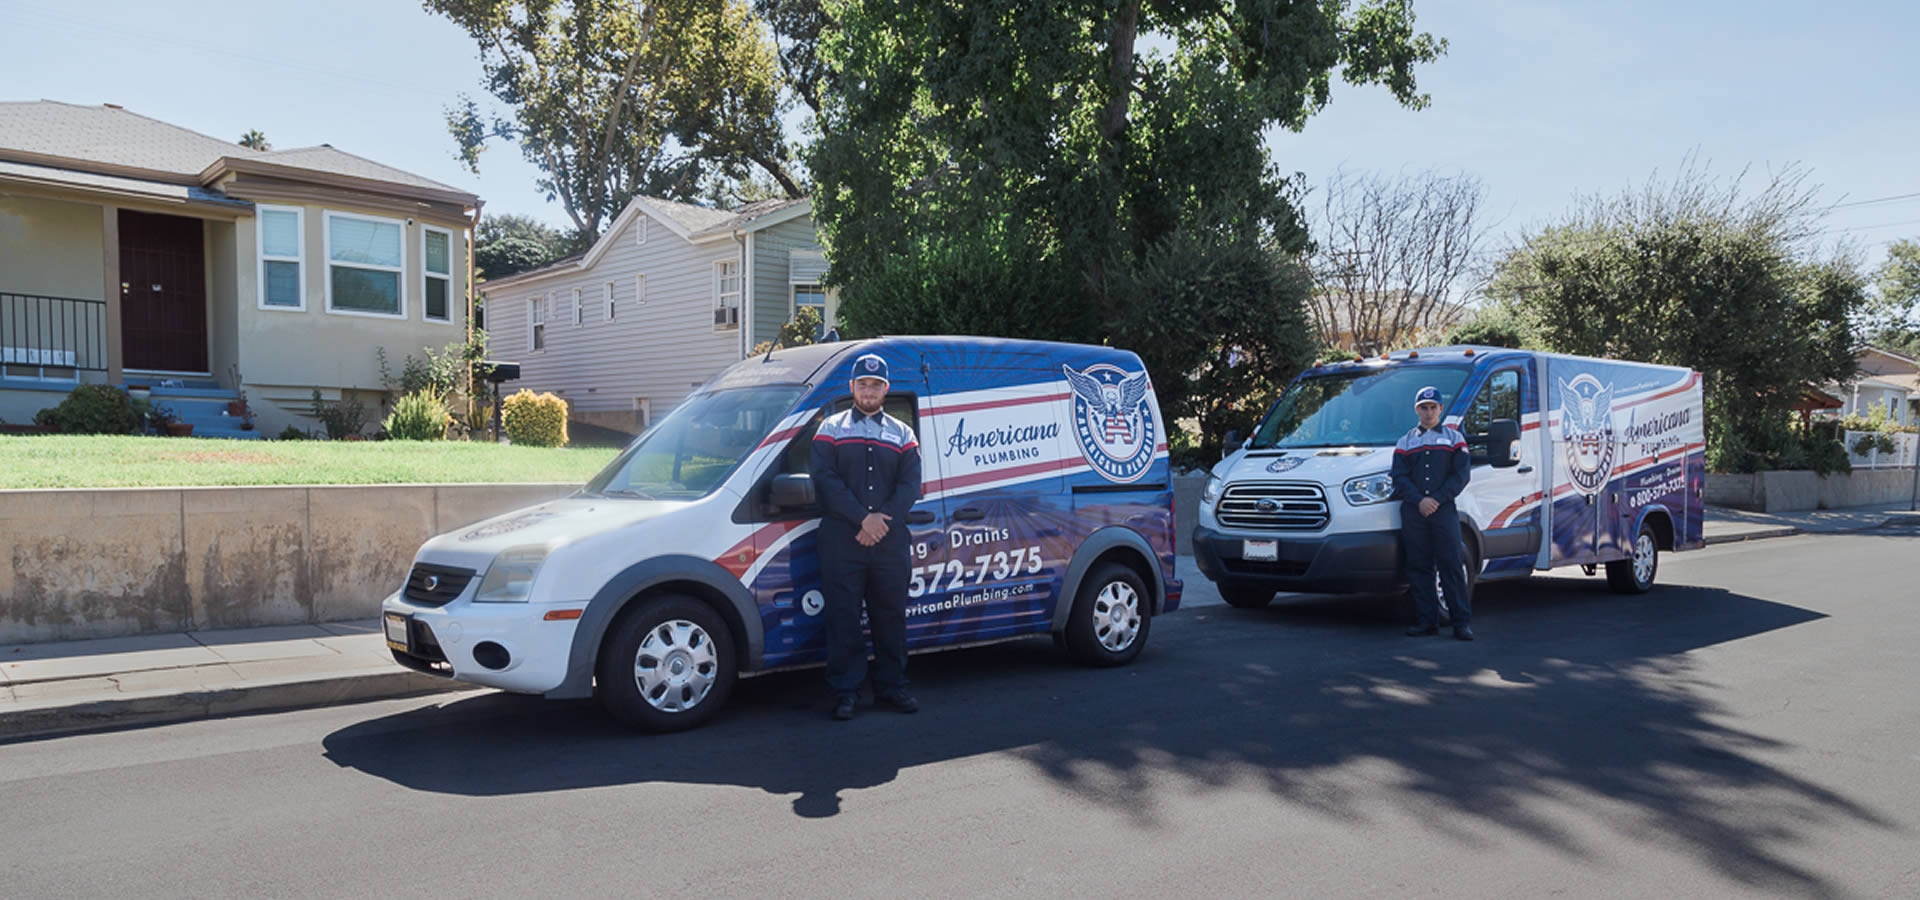  How to Find a Reliable Local Plumber